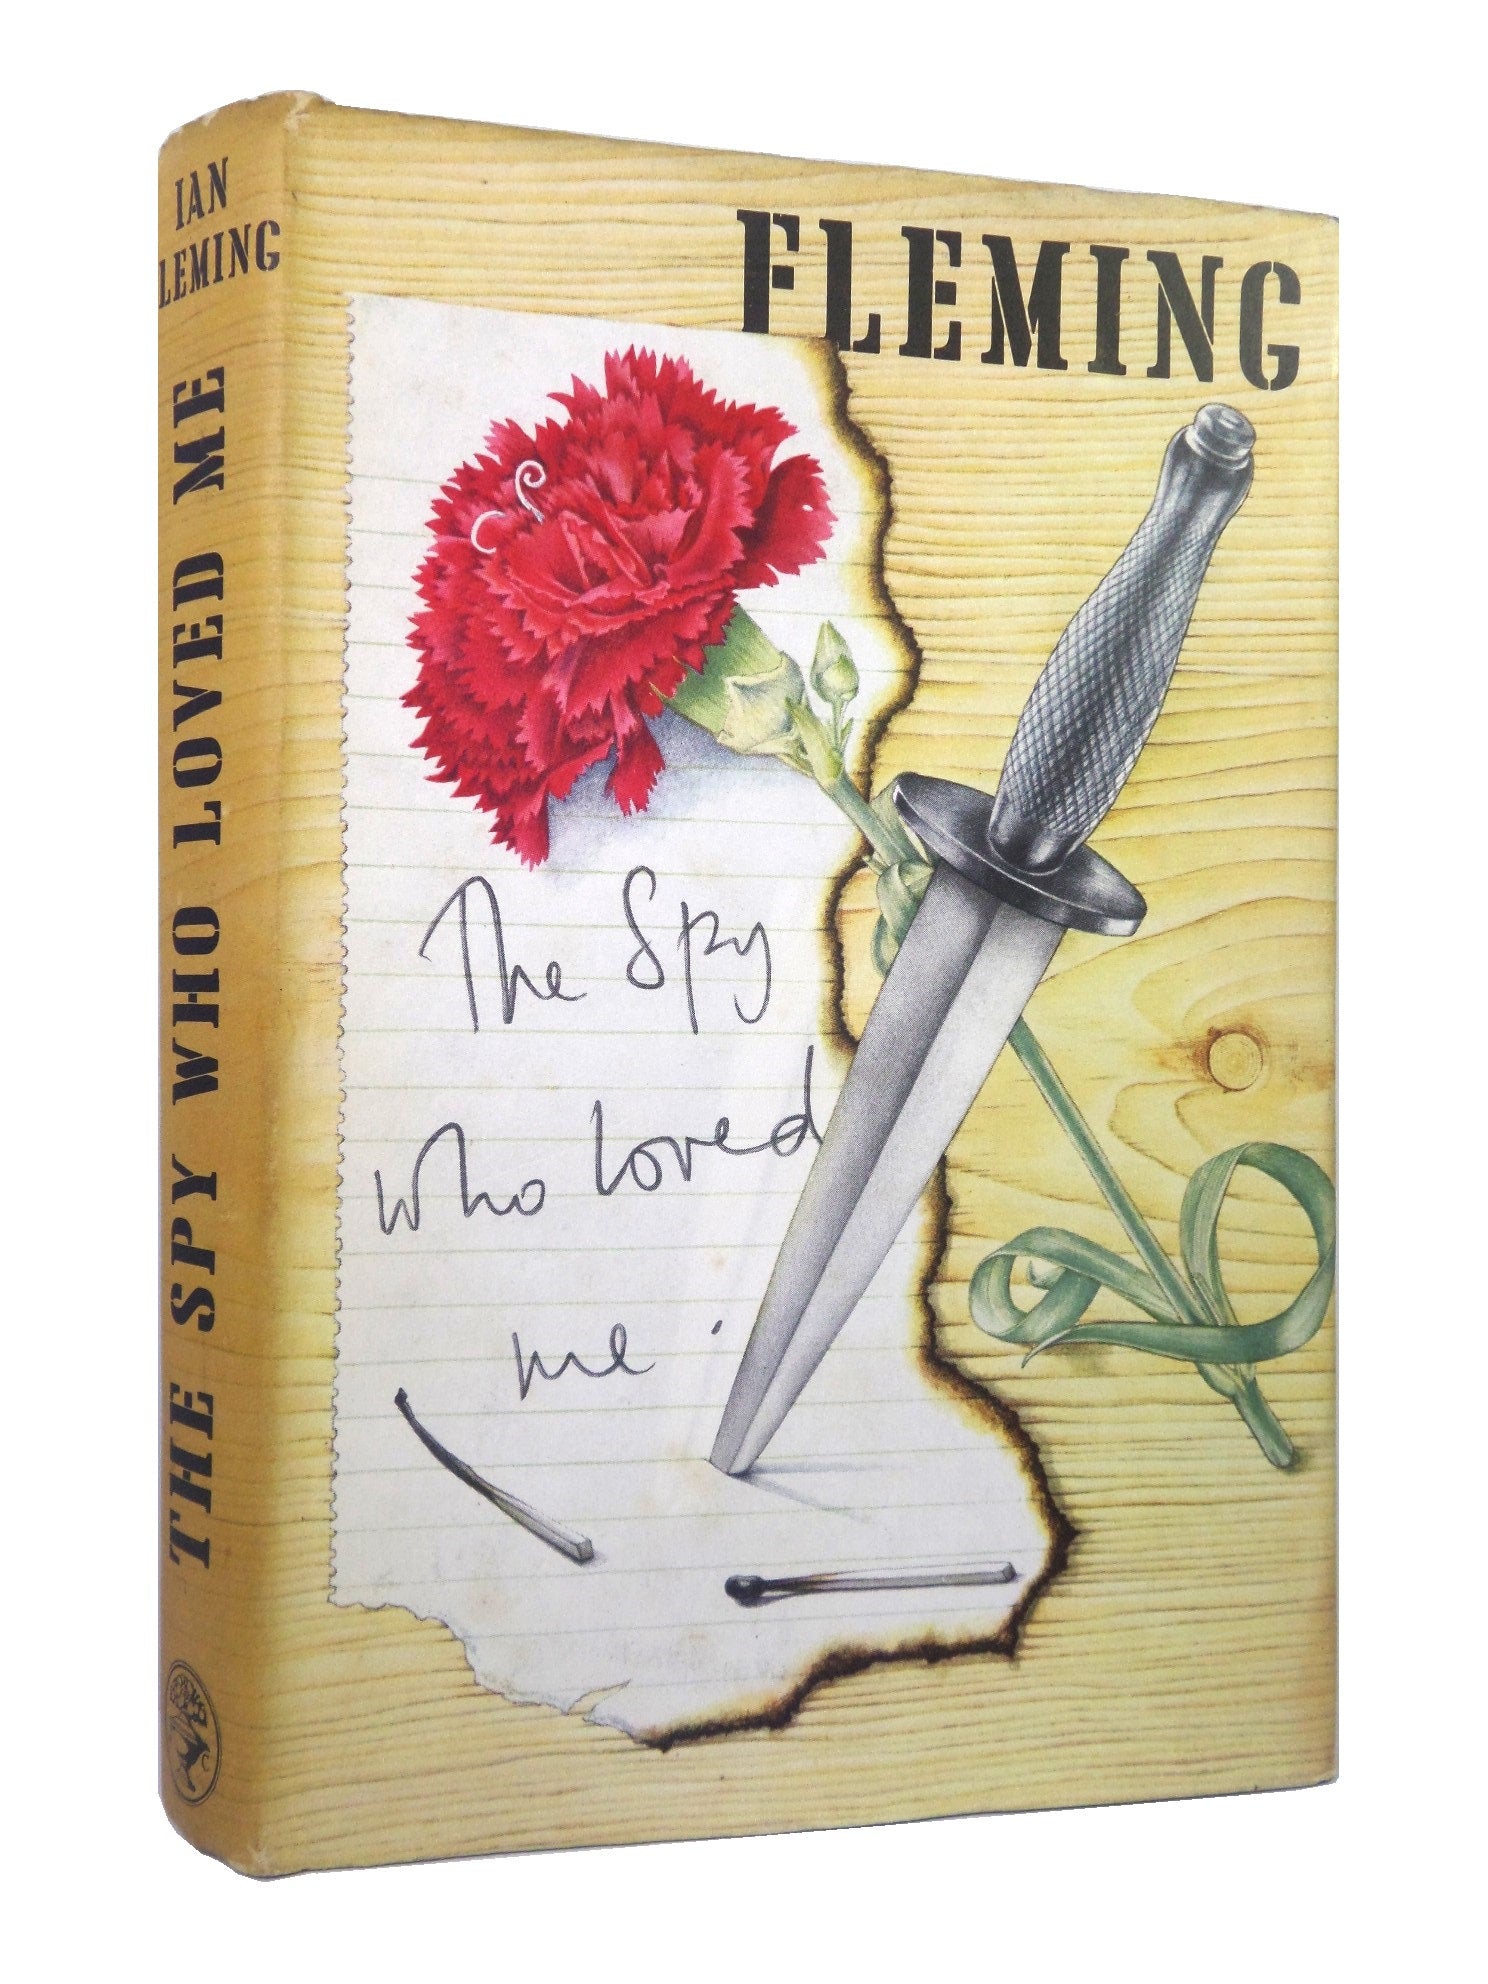 THE SPY WHO LOVED ME BY IAN FLEMING 1962 FIRST EDITION